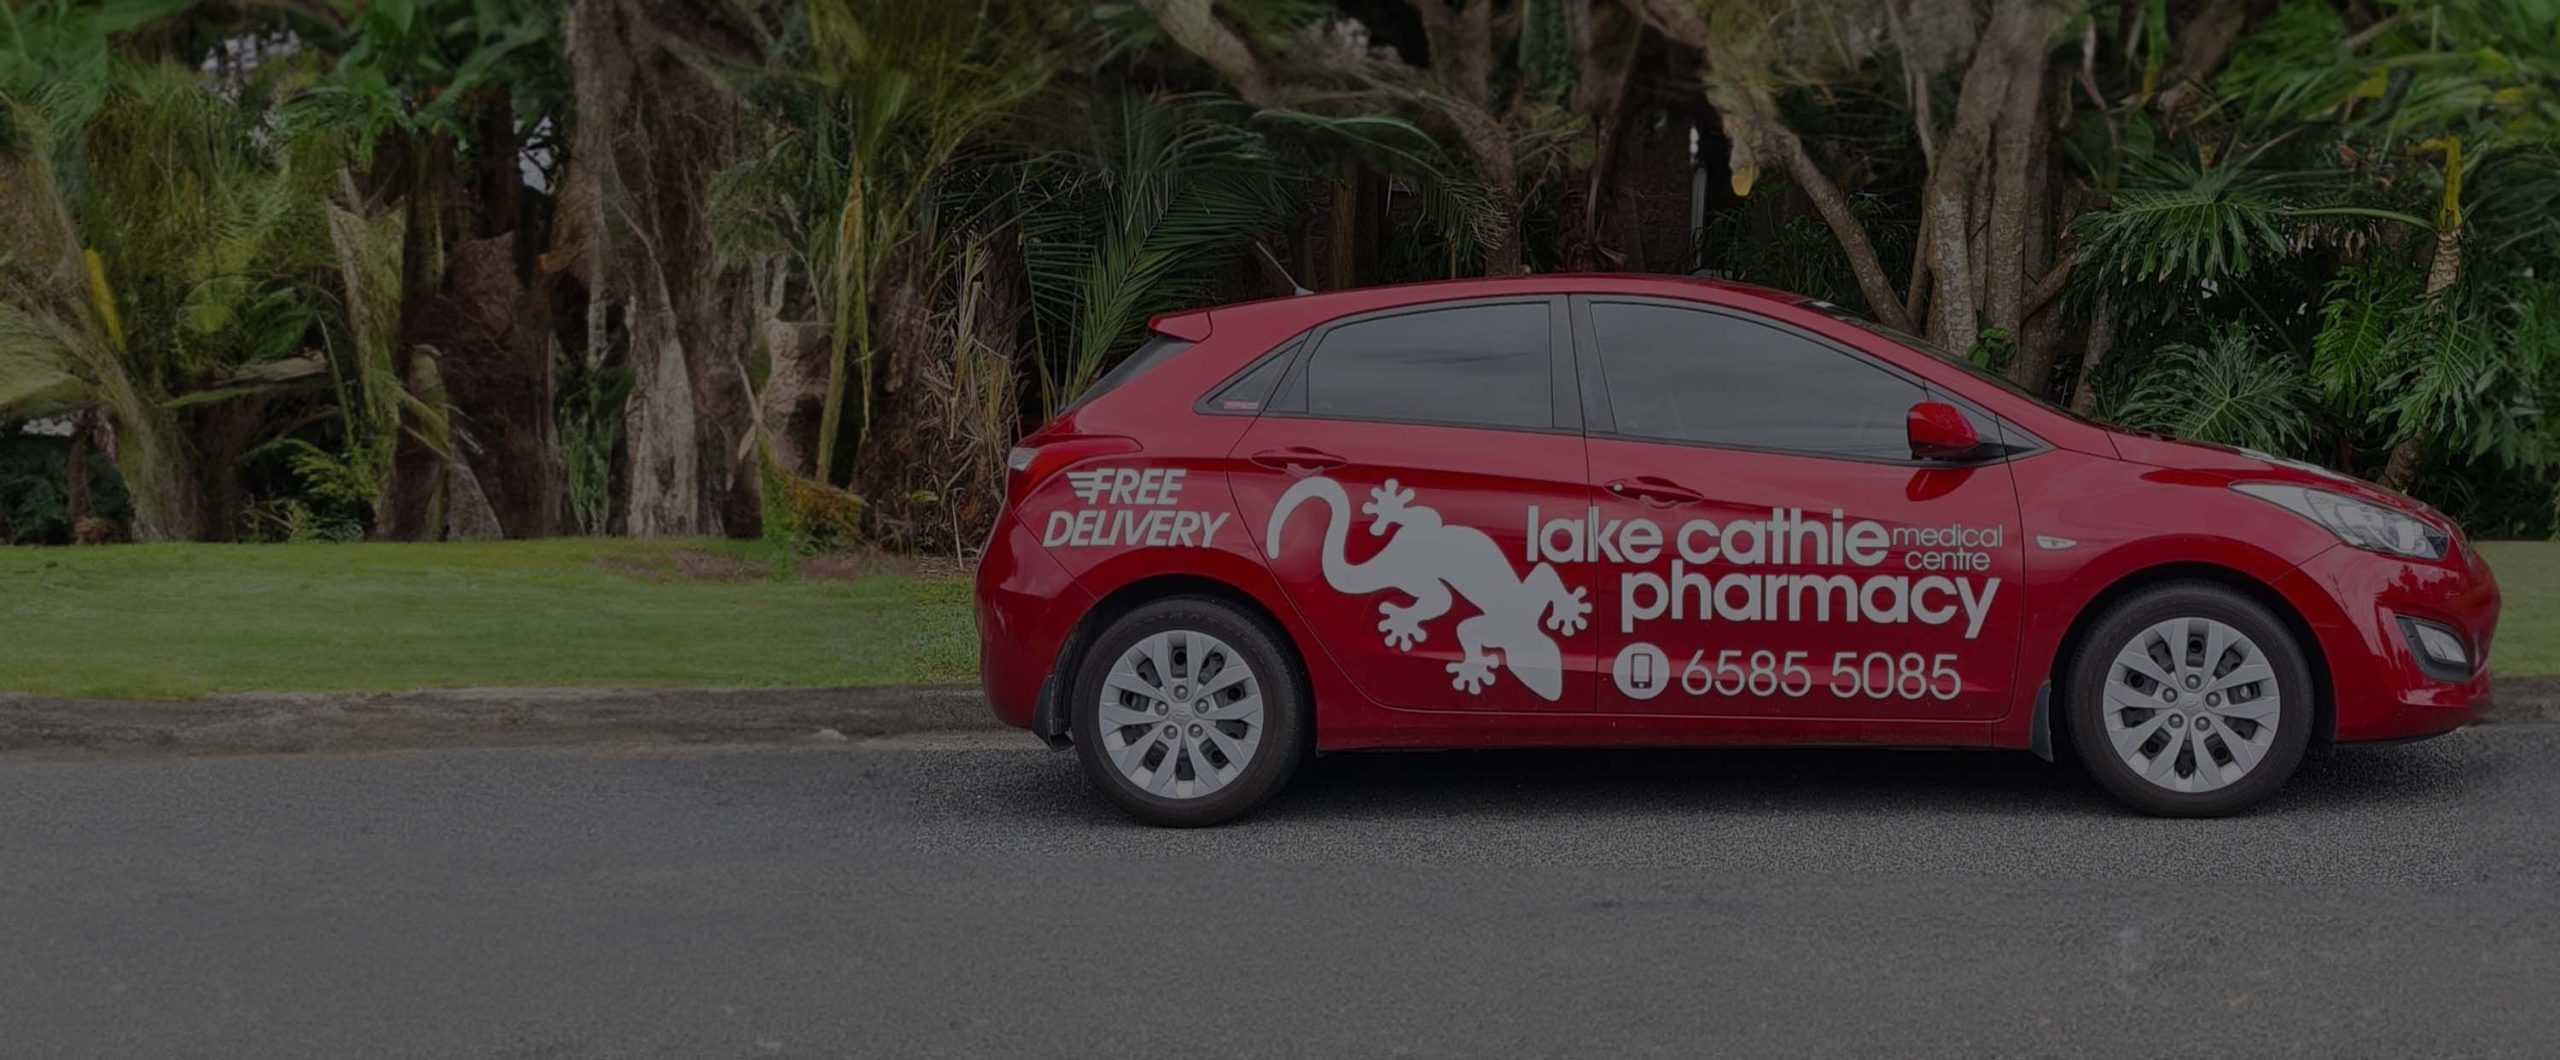 Lake Cathie Medical Centre - Delivery Service